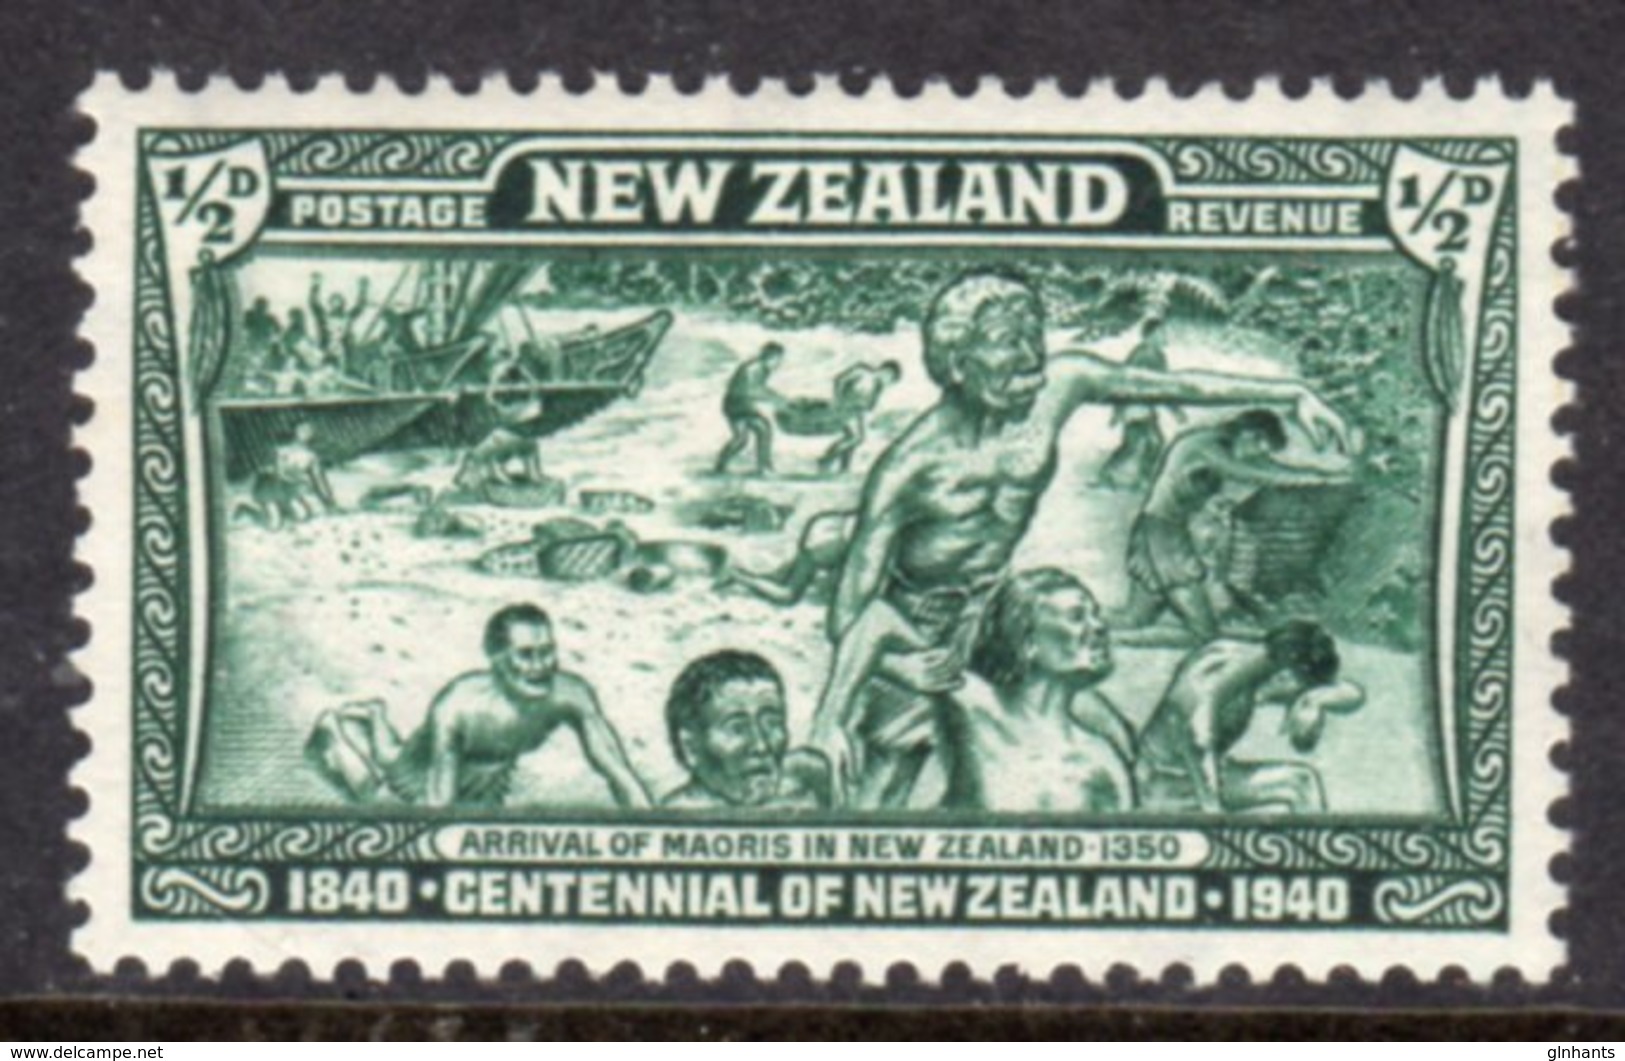 NEW ZEALAND - 1940 BRITISH SOVEREIGNTY CENTENARY MAORI ARRIVAL SHIP 1/2d STAMP FINE MOUNTED MINT MM * SG613 - Unused Stamps